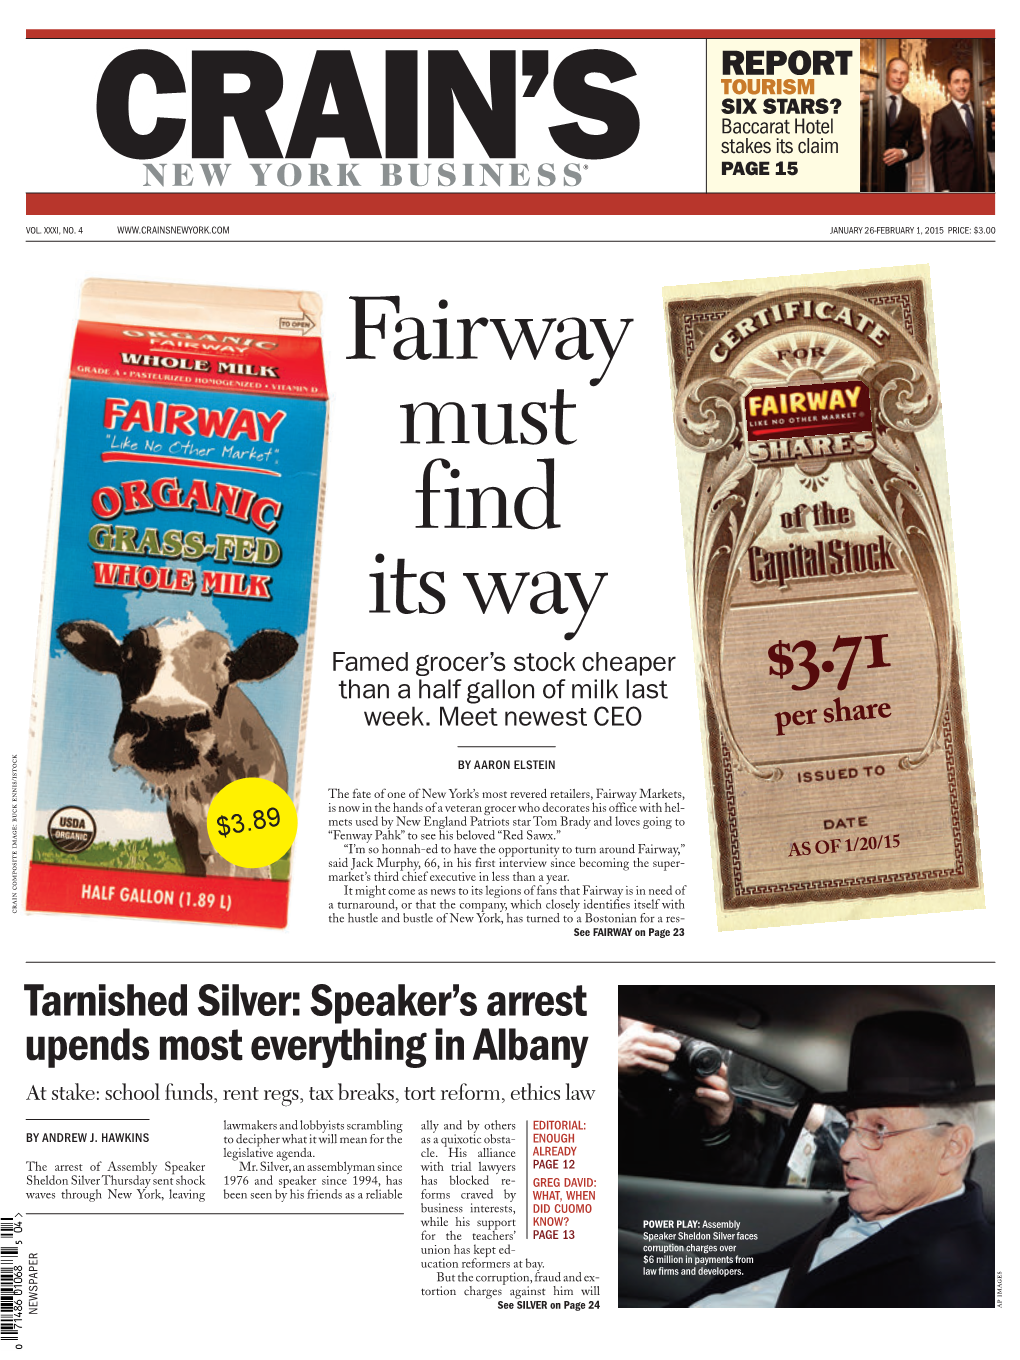 Tarnished Silver: Speaker's Arrest Upends Most Everything in Albany